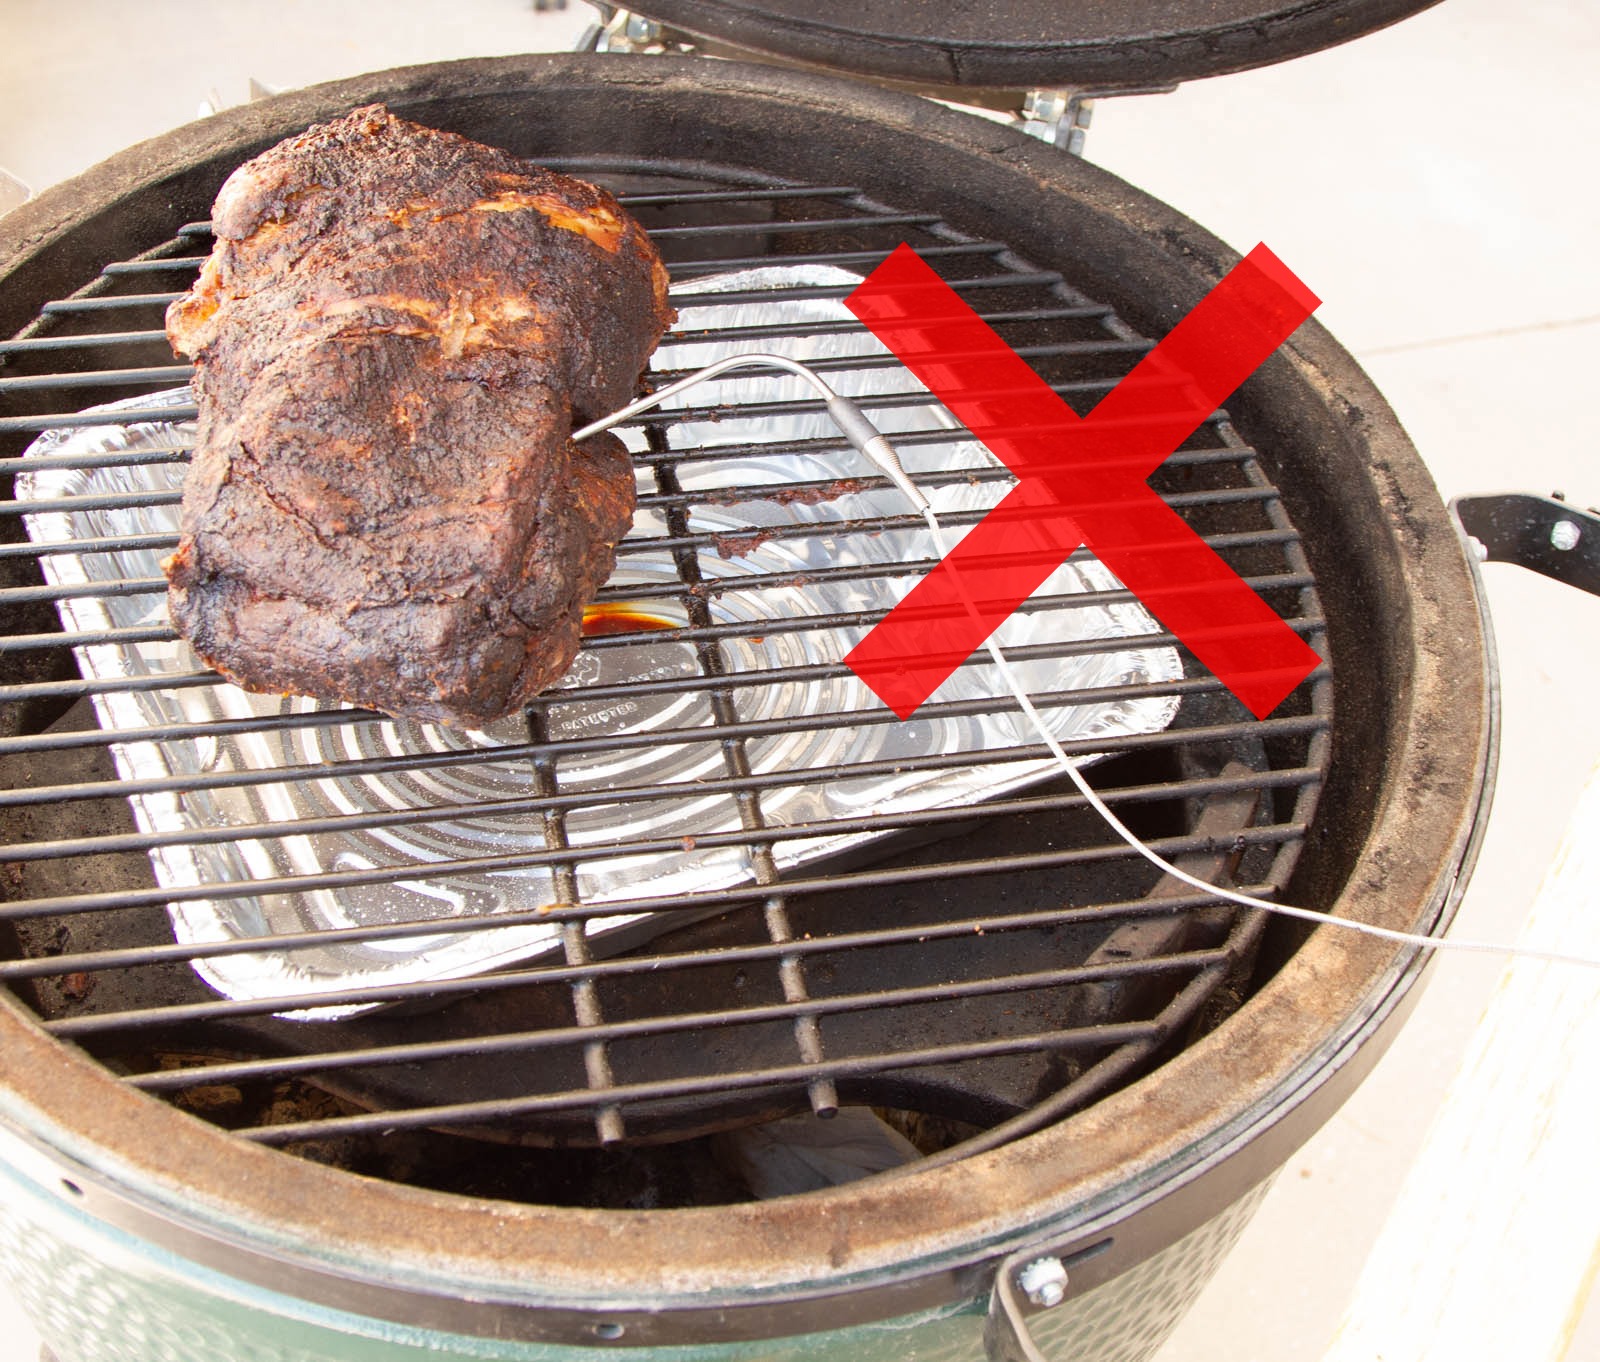 Using a Water Pan in Your Smoker